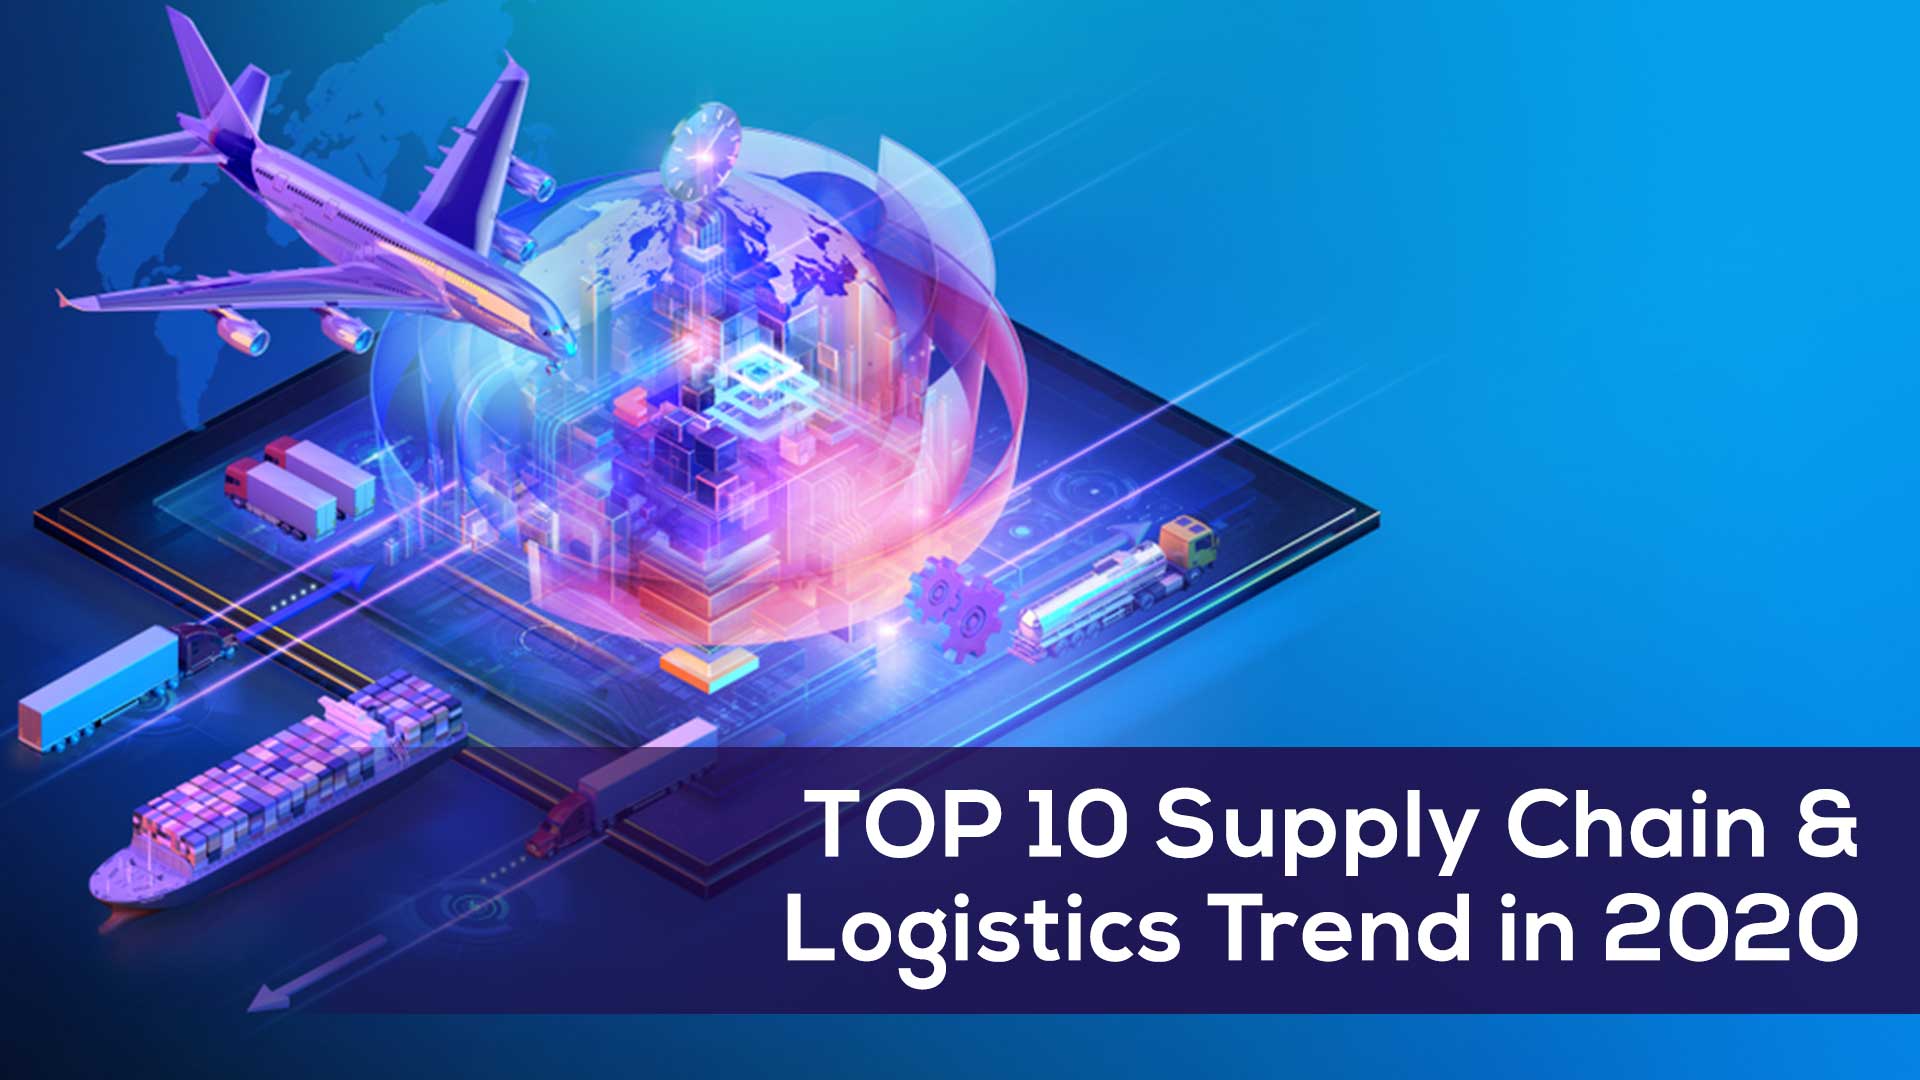 Top 10 Supply Chain And Logistics Trends in 2020 - TransGlobe Academy